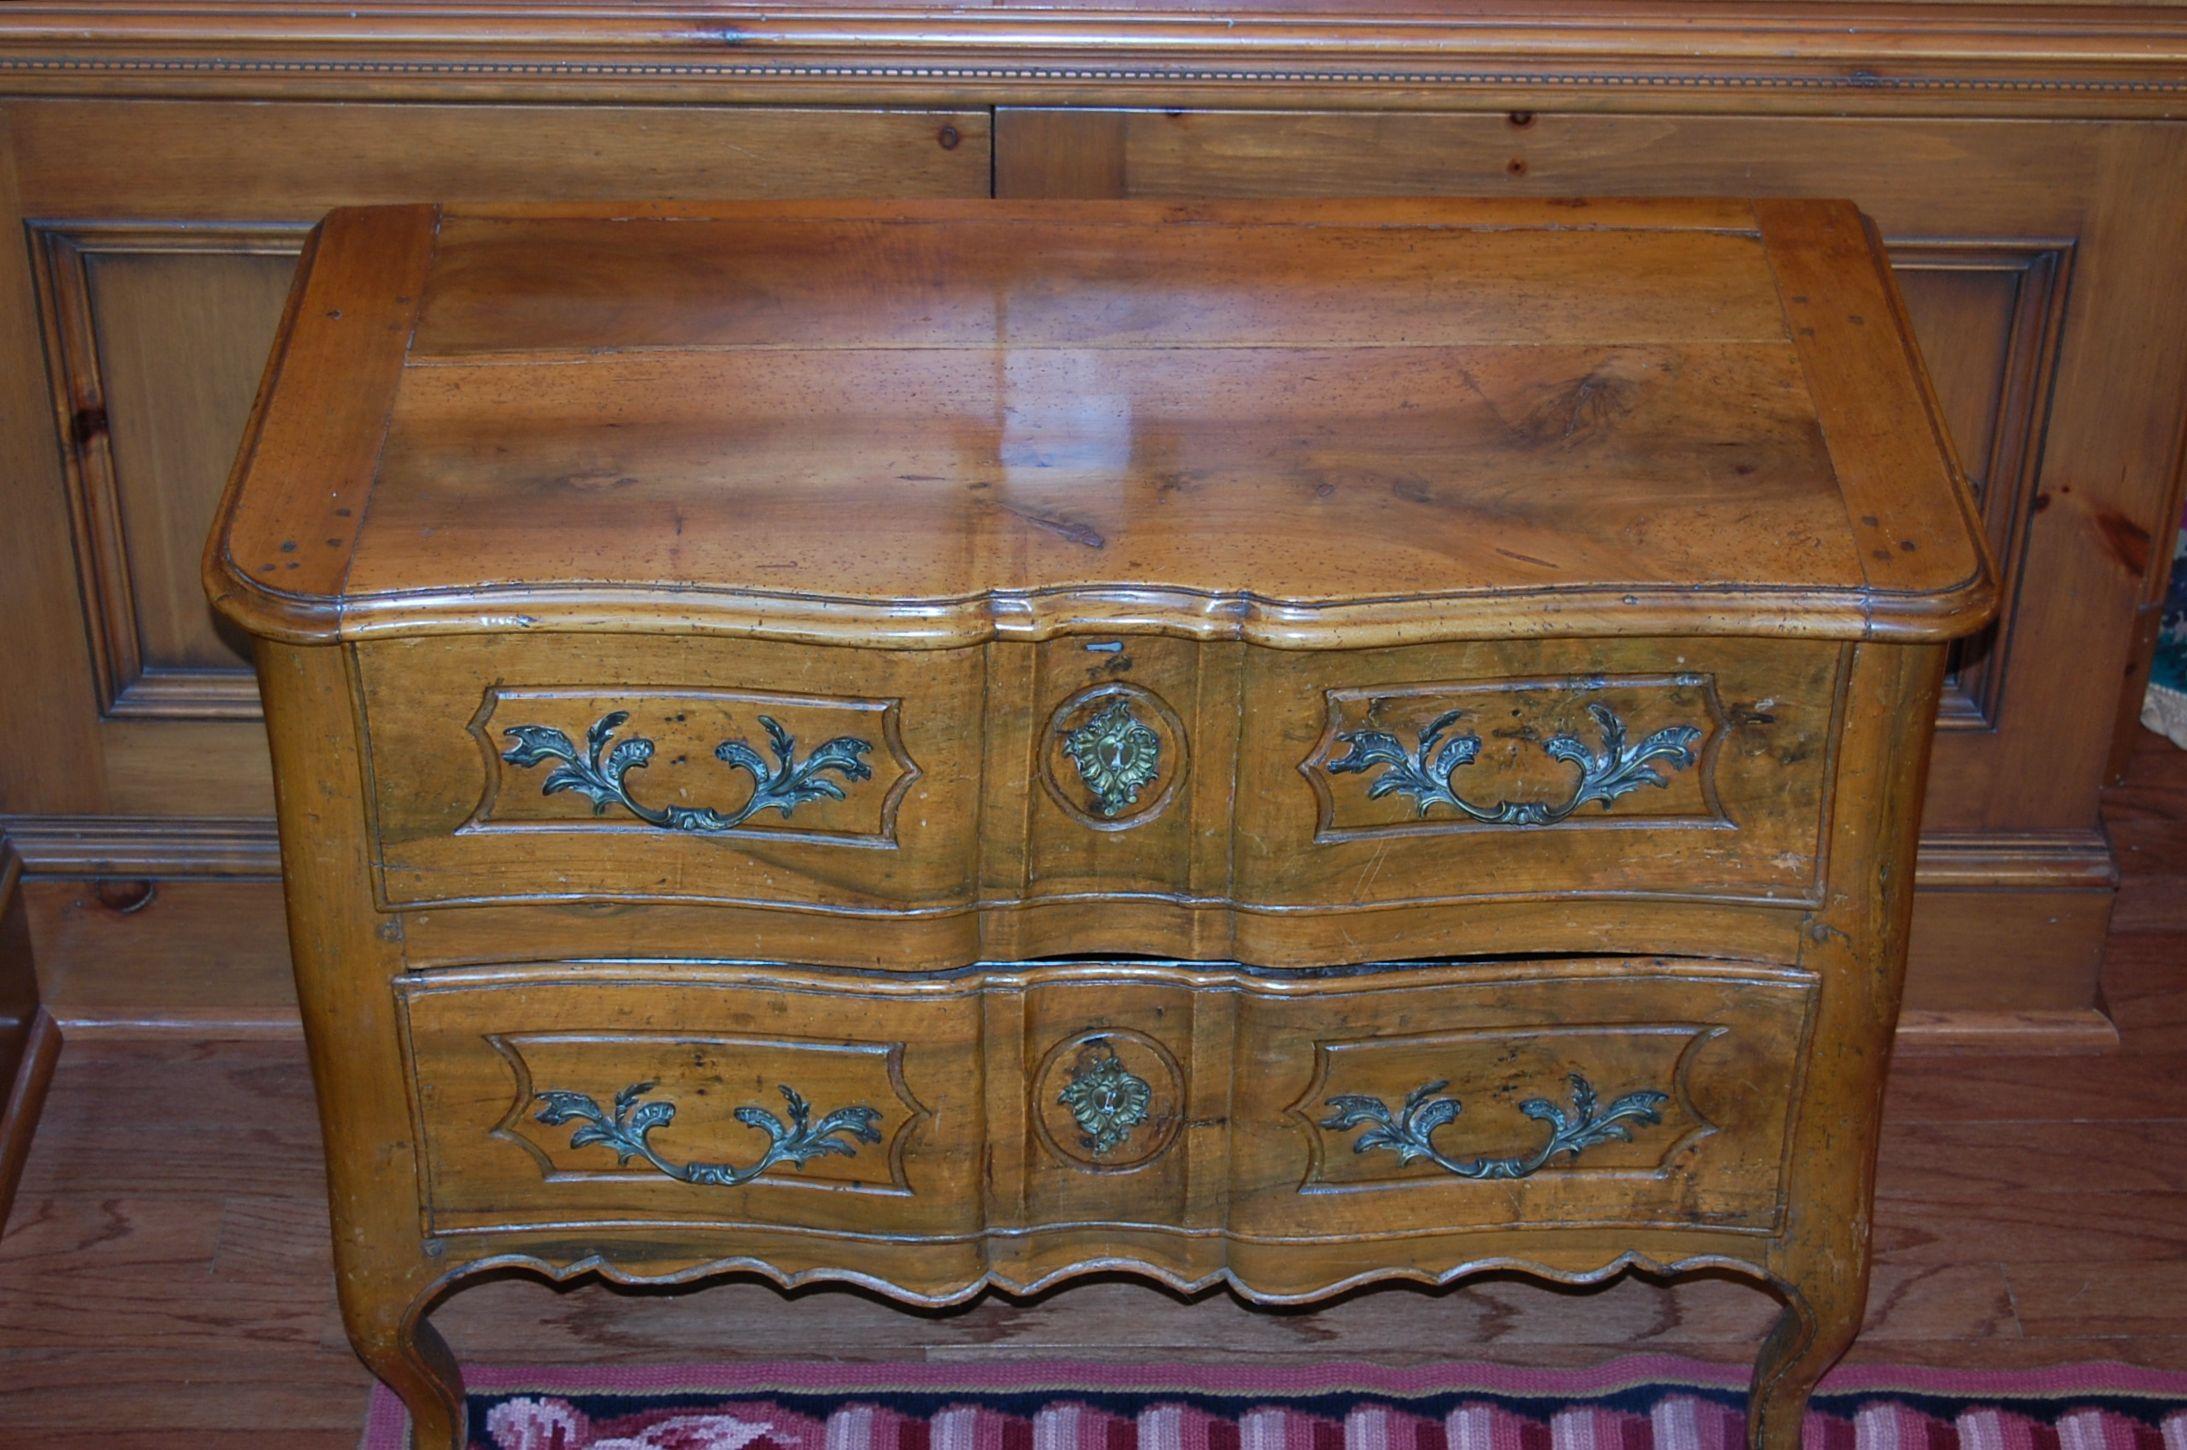 A provincial Louis XV period carved Walnut two drawer commode, circa 1765-1780 with original finish and delicate carvings. Original hardware. Lined in a cotton print fabric. This is a meticulously hand carved, antique French commode sauteuse from